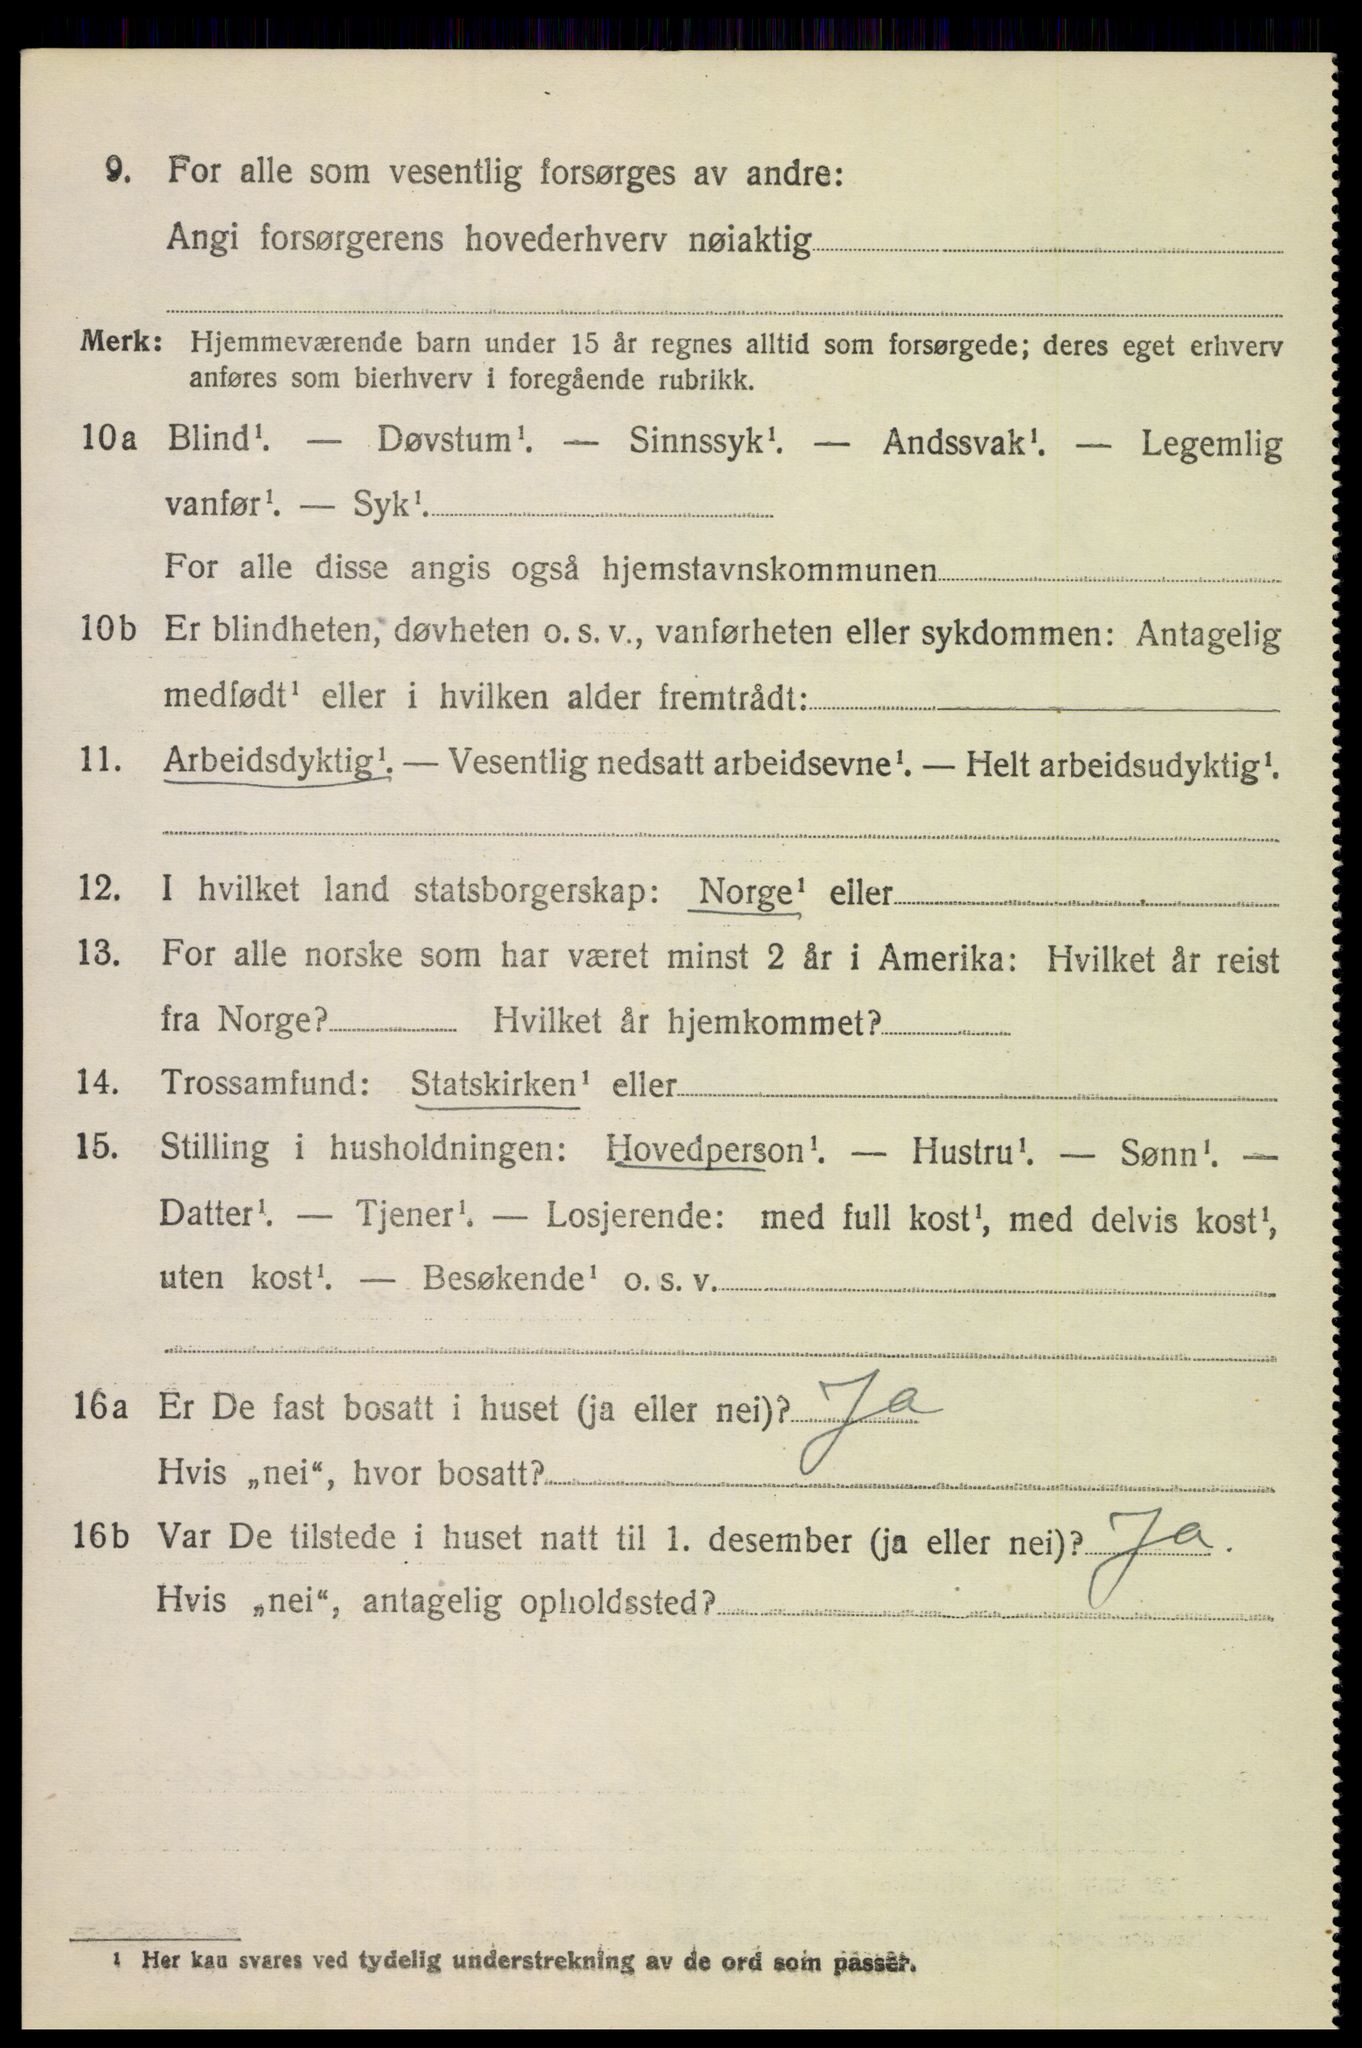 SAH, 1920 census for Nord-Fron, 1920, p. 4025